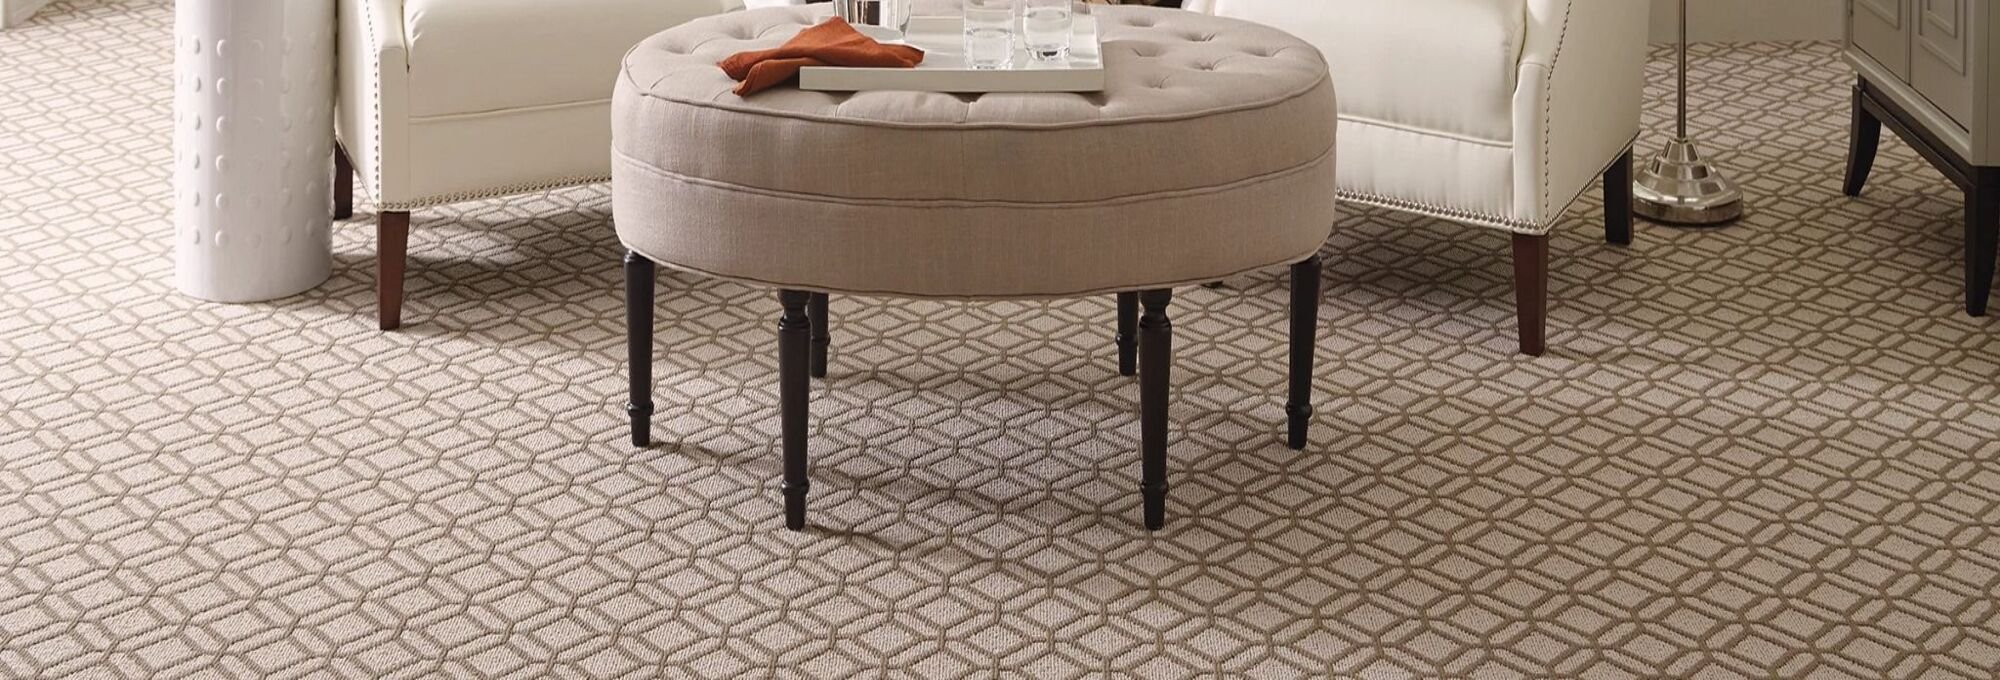 Two armchair and table - Andersons New Carpet Design in Fridley